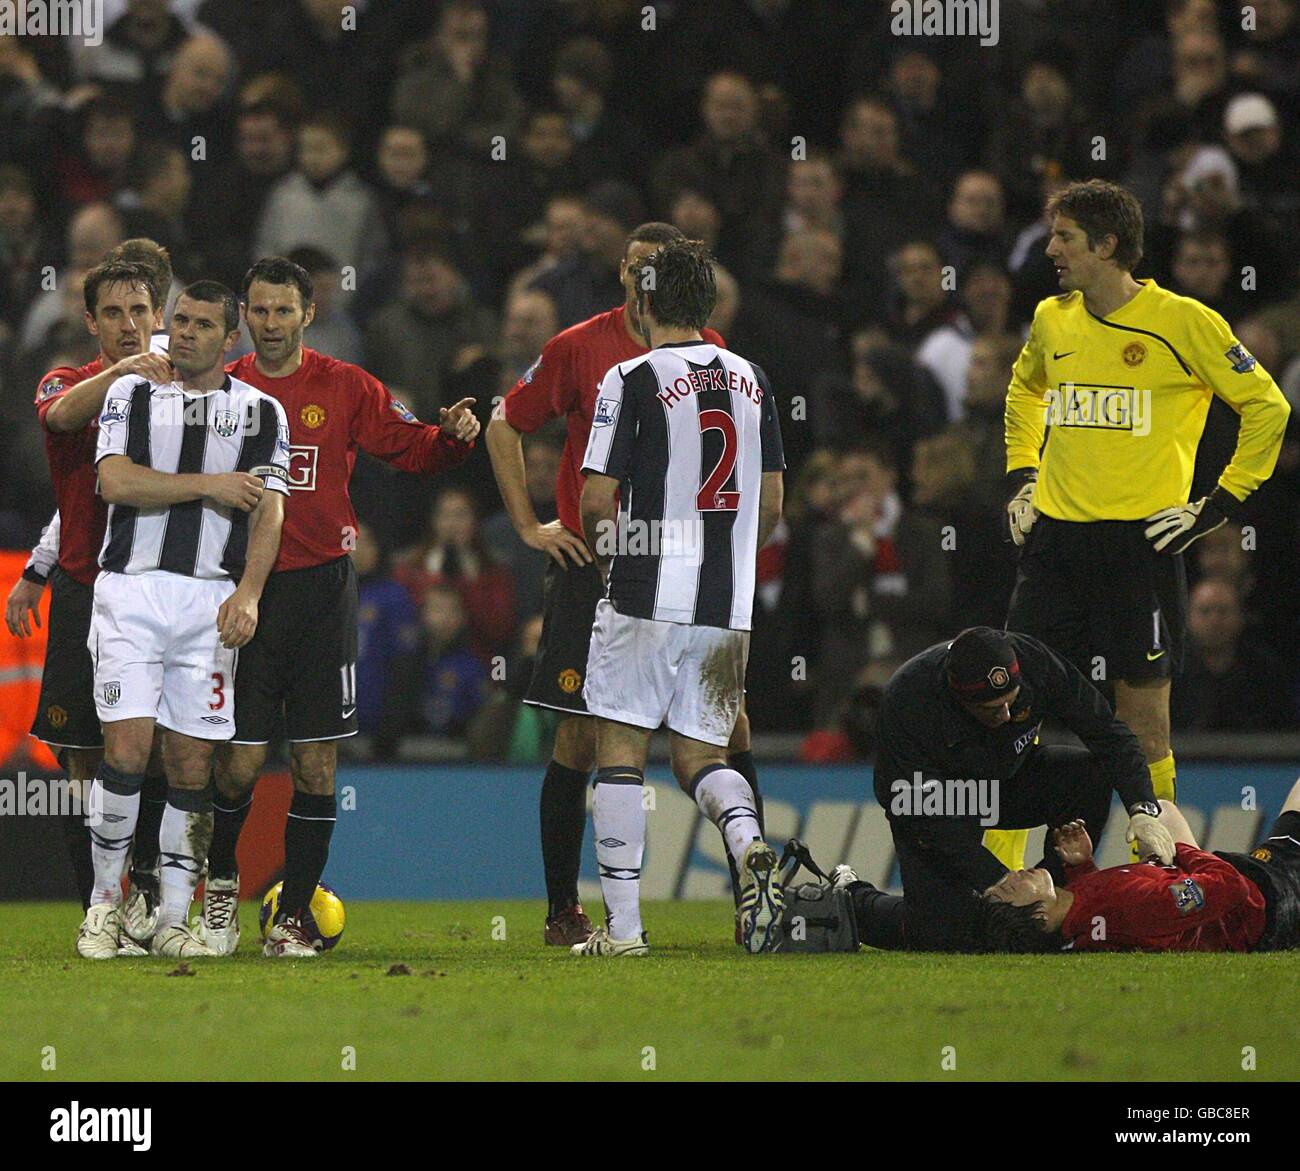 Manchester United's Gary Neville (l) and Ryan Giggs (3rd r) console West Bromwich Albion's Paul Robinson (2nd l) as he is sent off for violent conduct for a challenge on Manchester United's Ji-Sung Park (r) Stock Photo